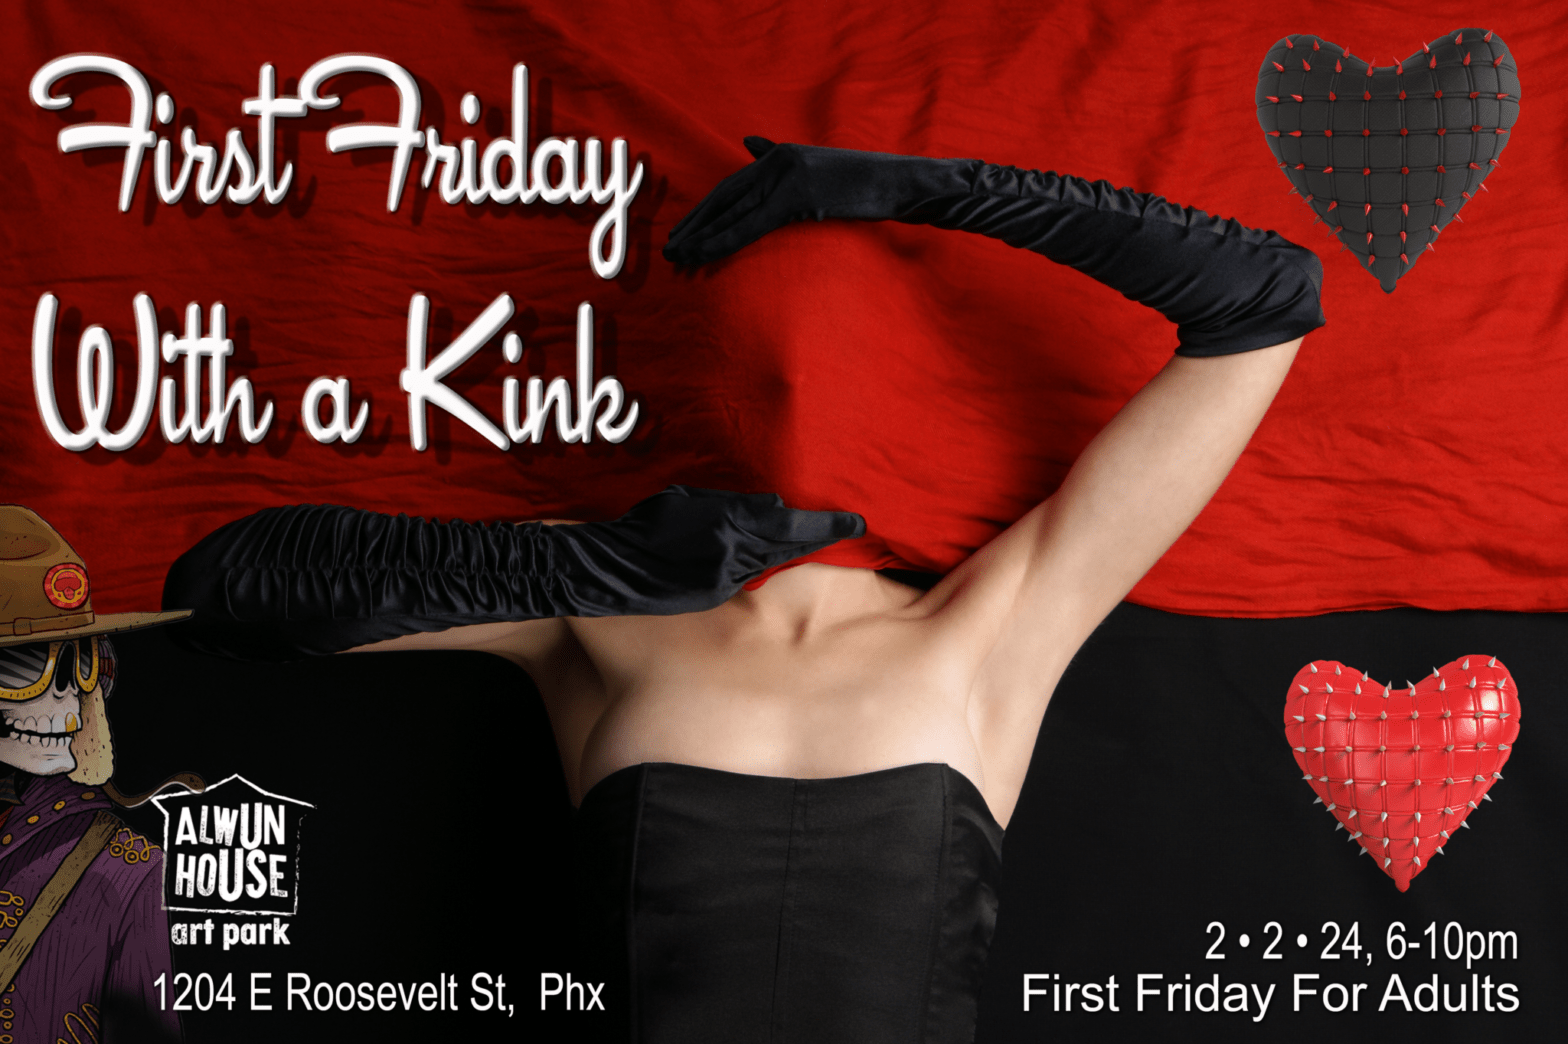 Featured image for post: First Friday With a Kink